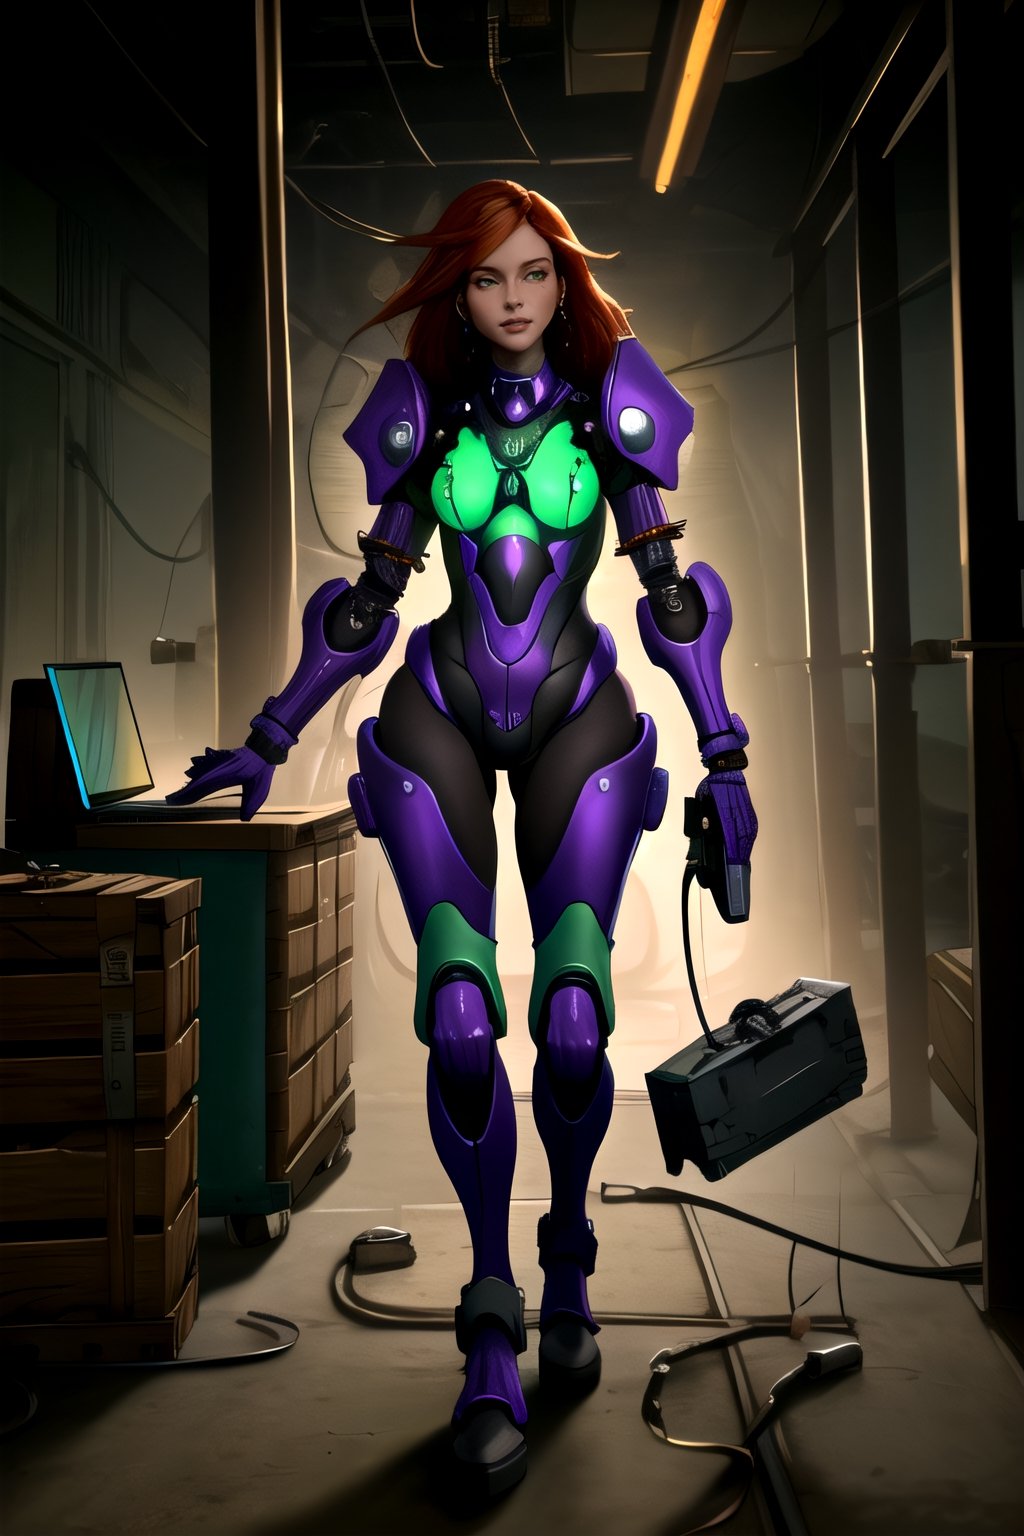 (best quality: 1.2), (masterpiece: 1.2), (realistic: 1.2), (detailed), 1woman in green mech exoskeleton, holding gun, purple suit, red hair, typing on laptop, grates, scifi, crates, lights, cables, shiny, test stand scaffold, Frank Frazetta artstyle, (masterpiece: 1.2), absurdres, HDR,